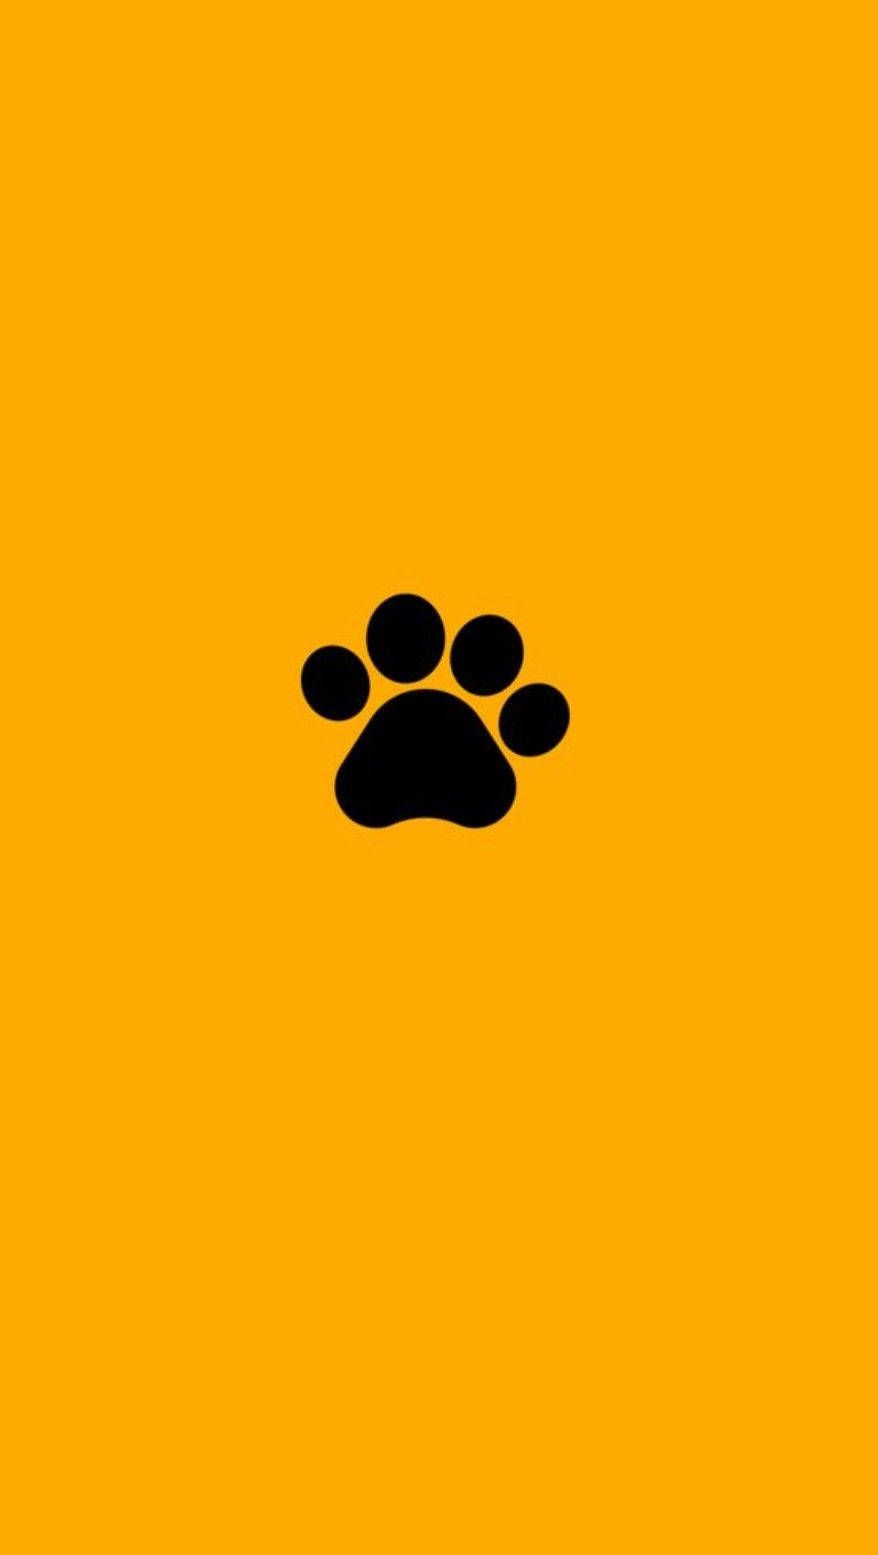 A black paw print on a yellow background - Light yellow